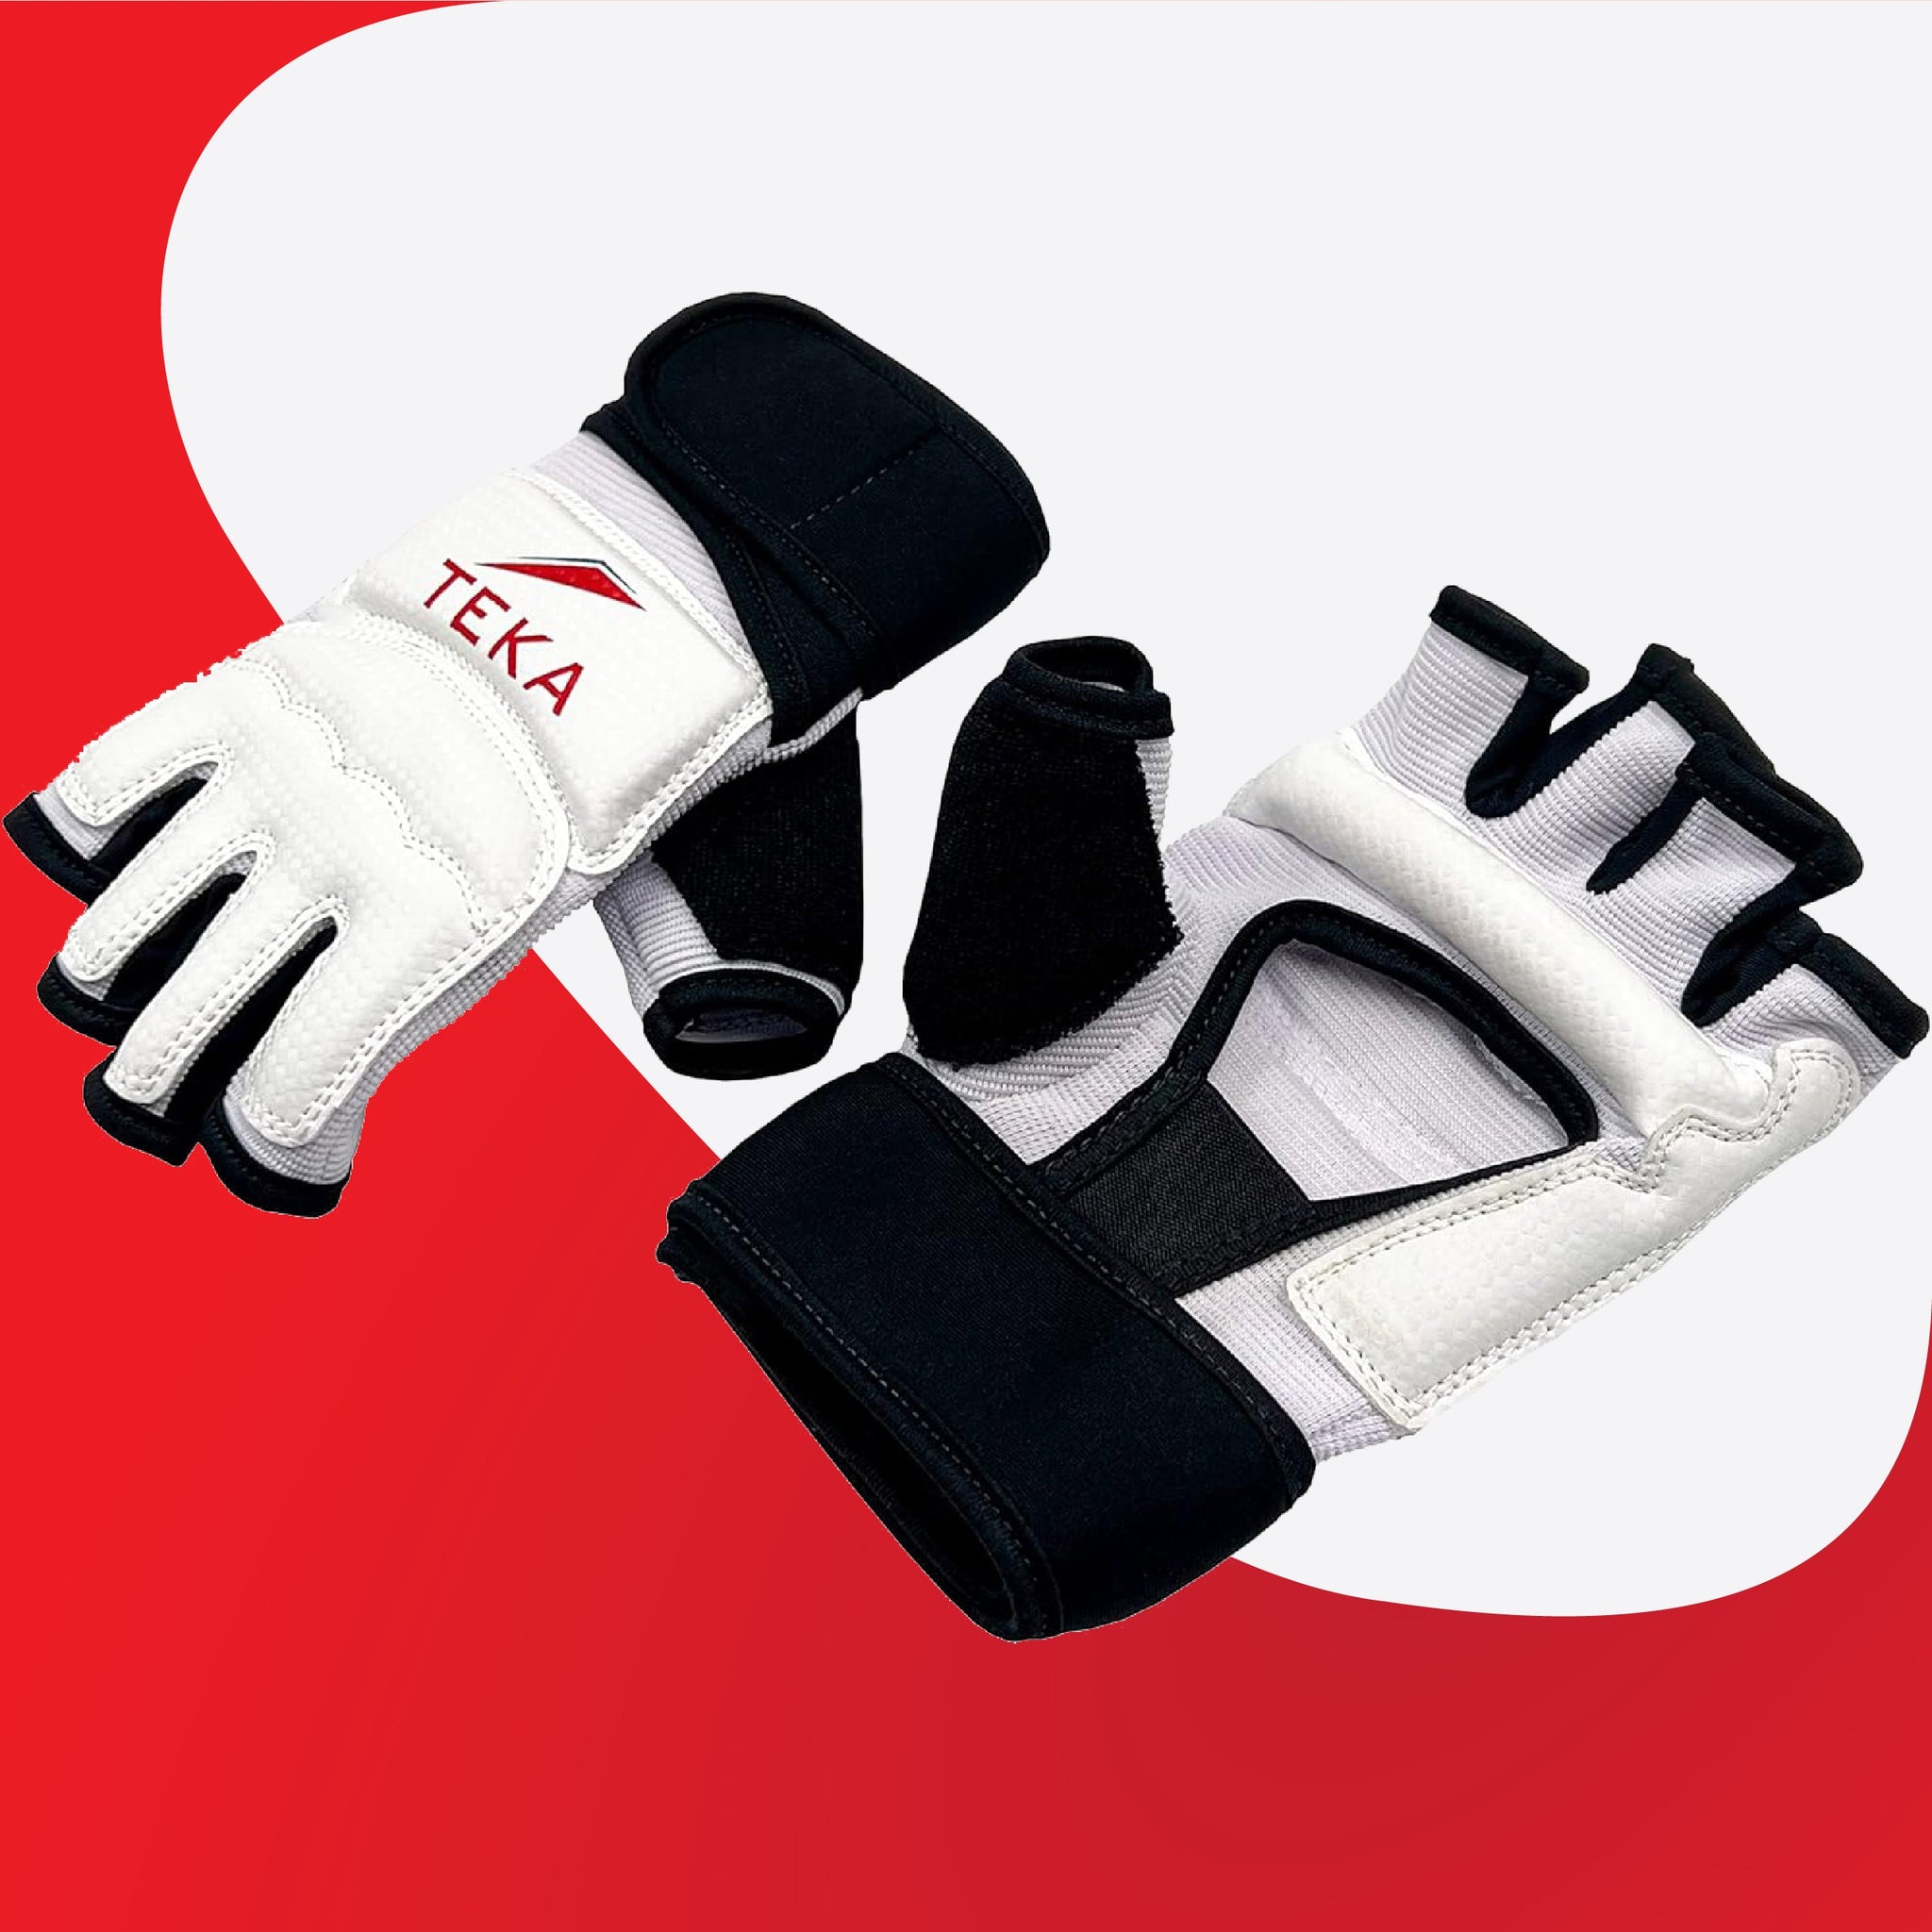 mma-punching-gloves-for-sparring-martial-arts-boxing-training-for-adults-and-kids